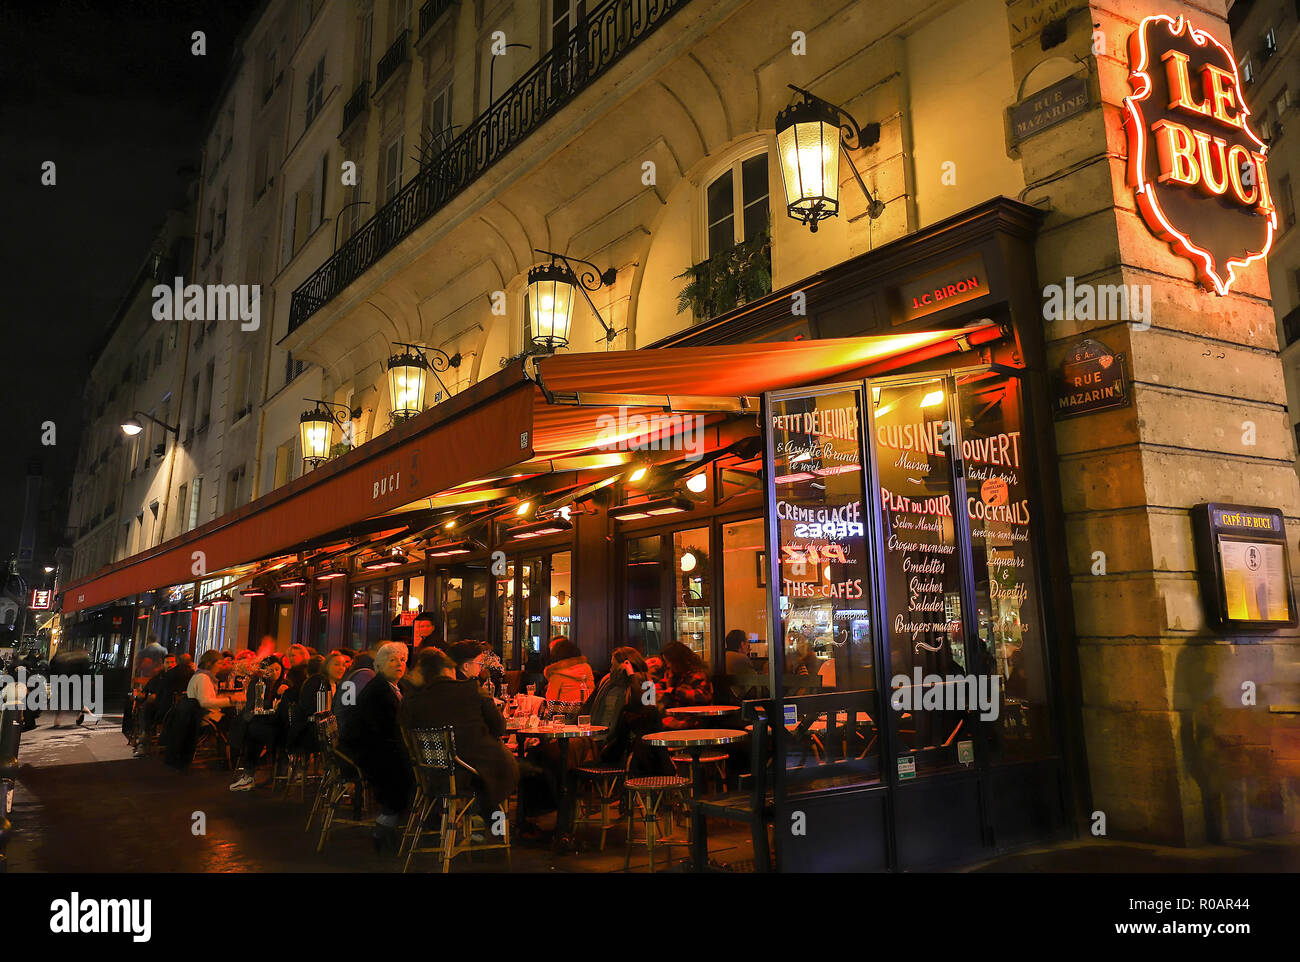 The traditional French cafe Buci located near Saint Germain boulevard in Paris, France. Stock Photo